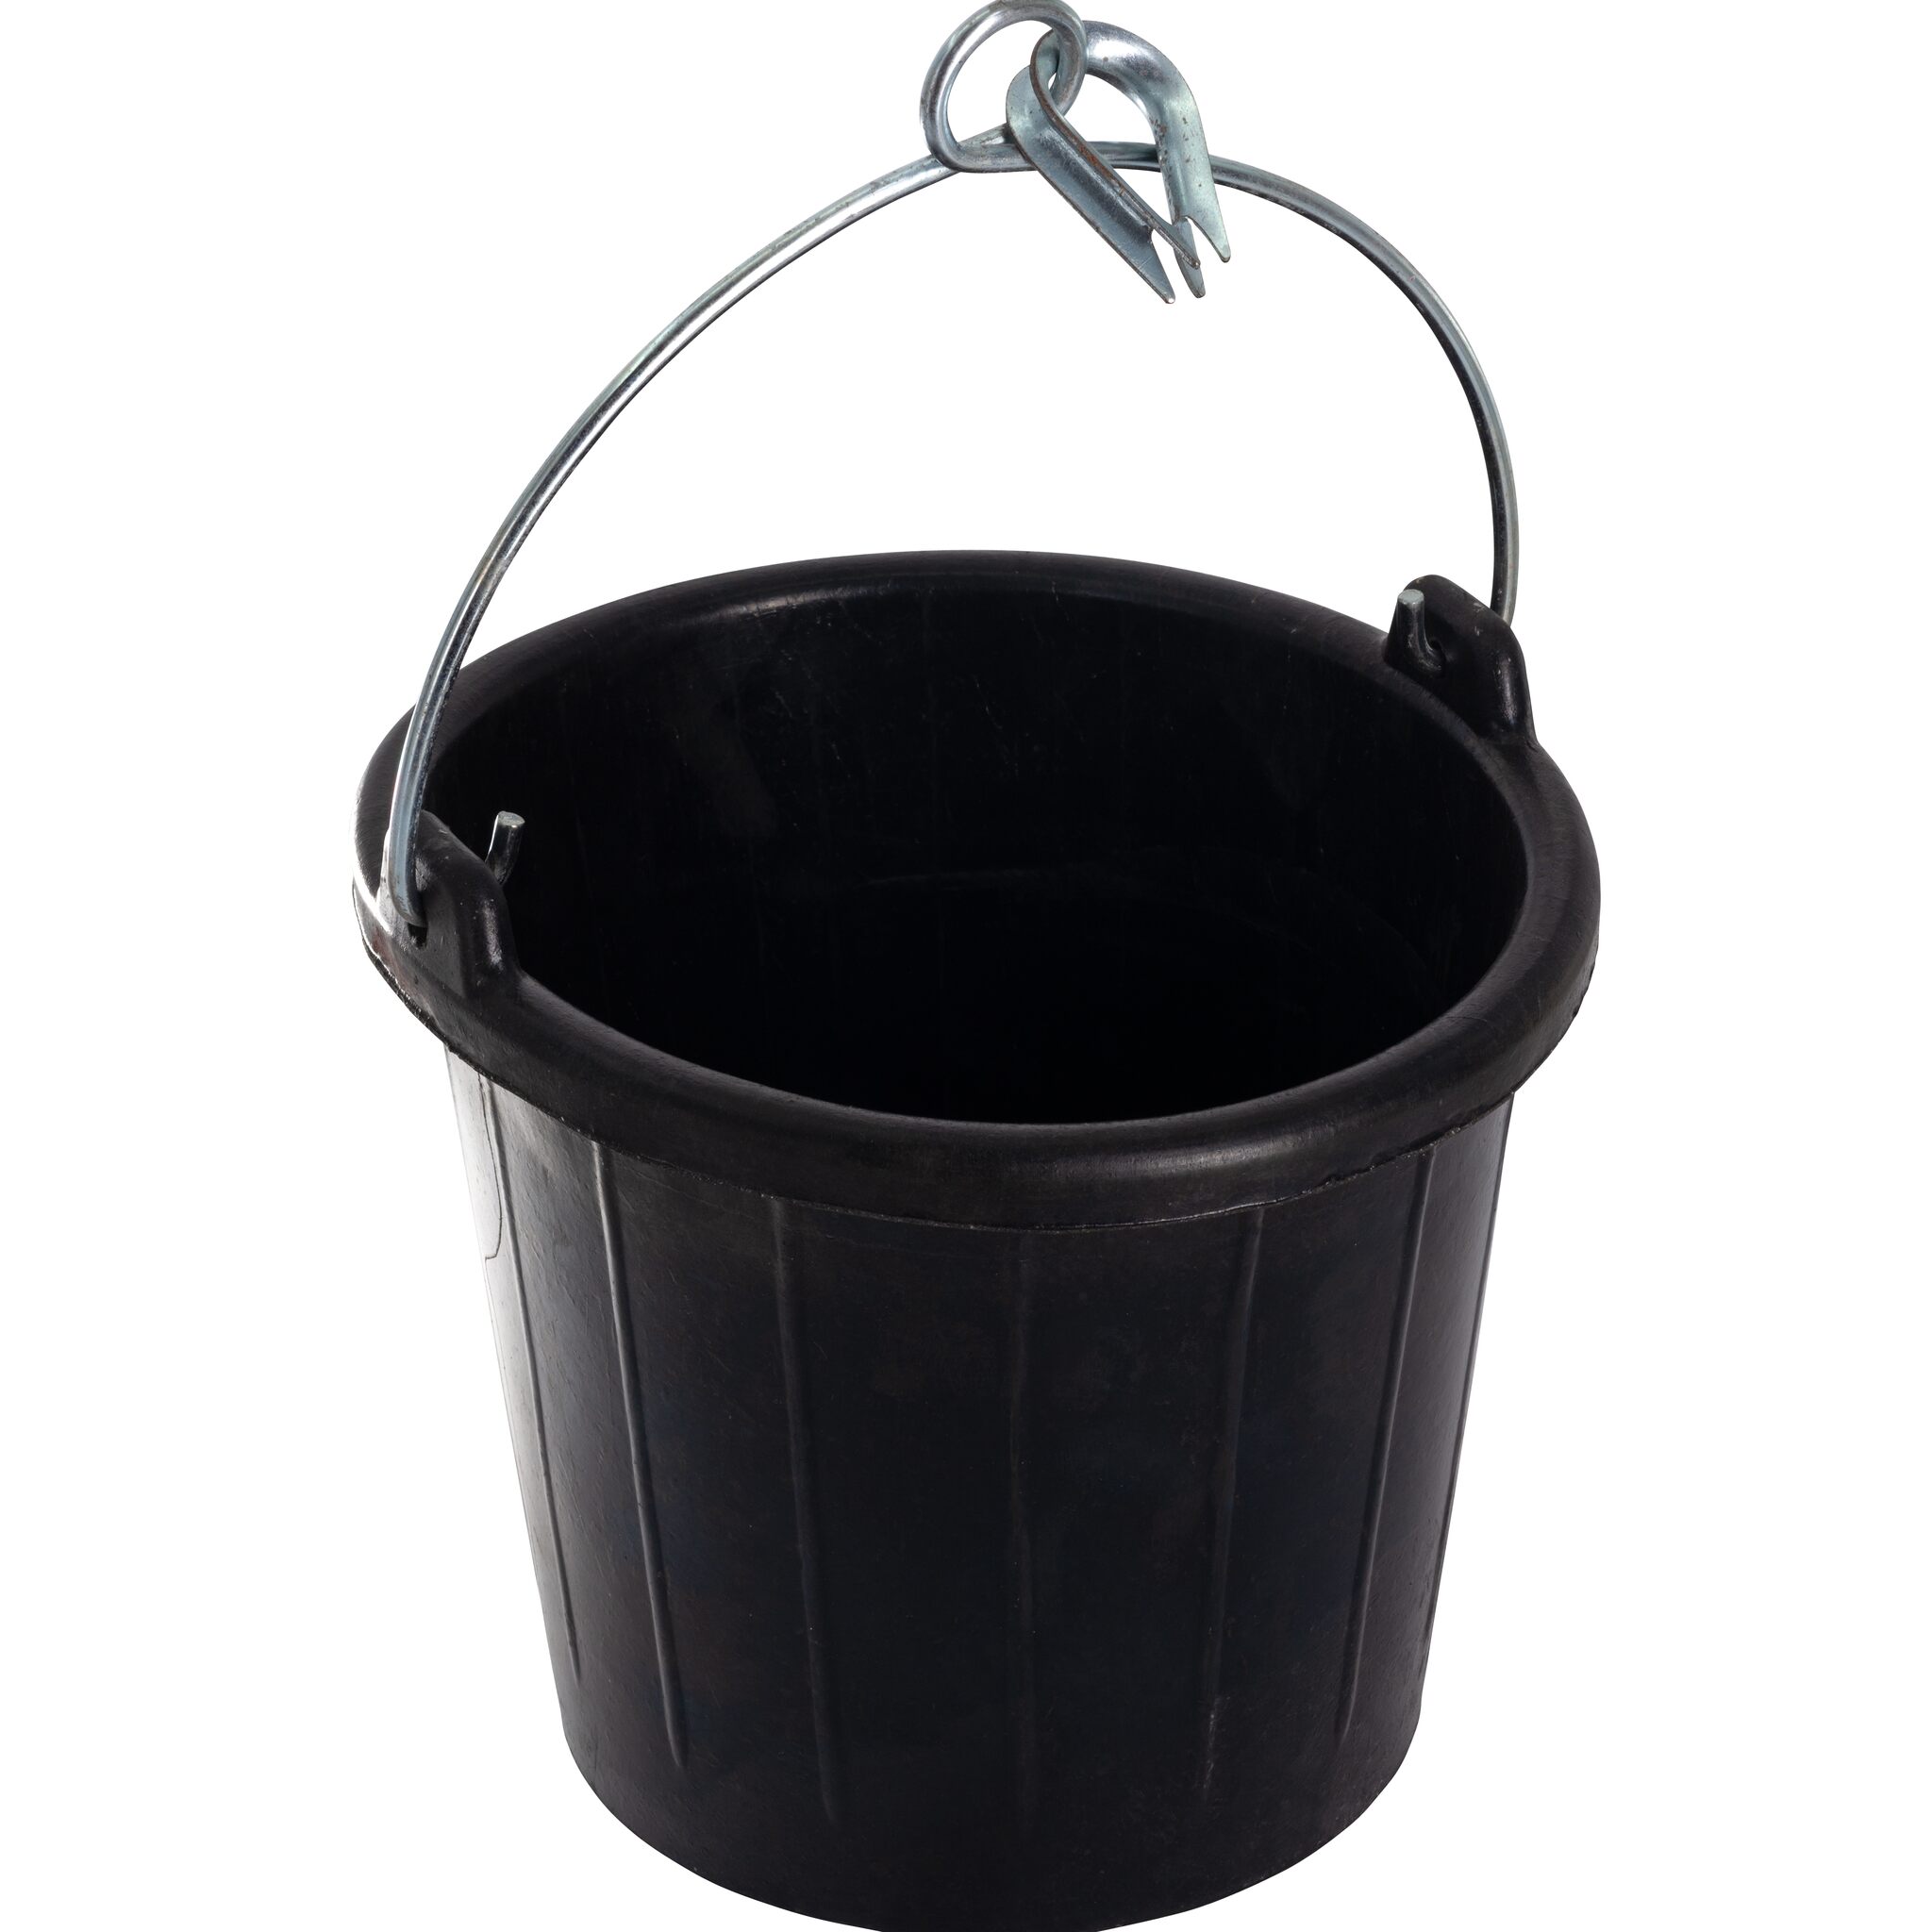 Yachticon rubber bucket, 8 liters